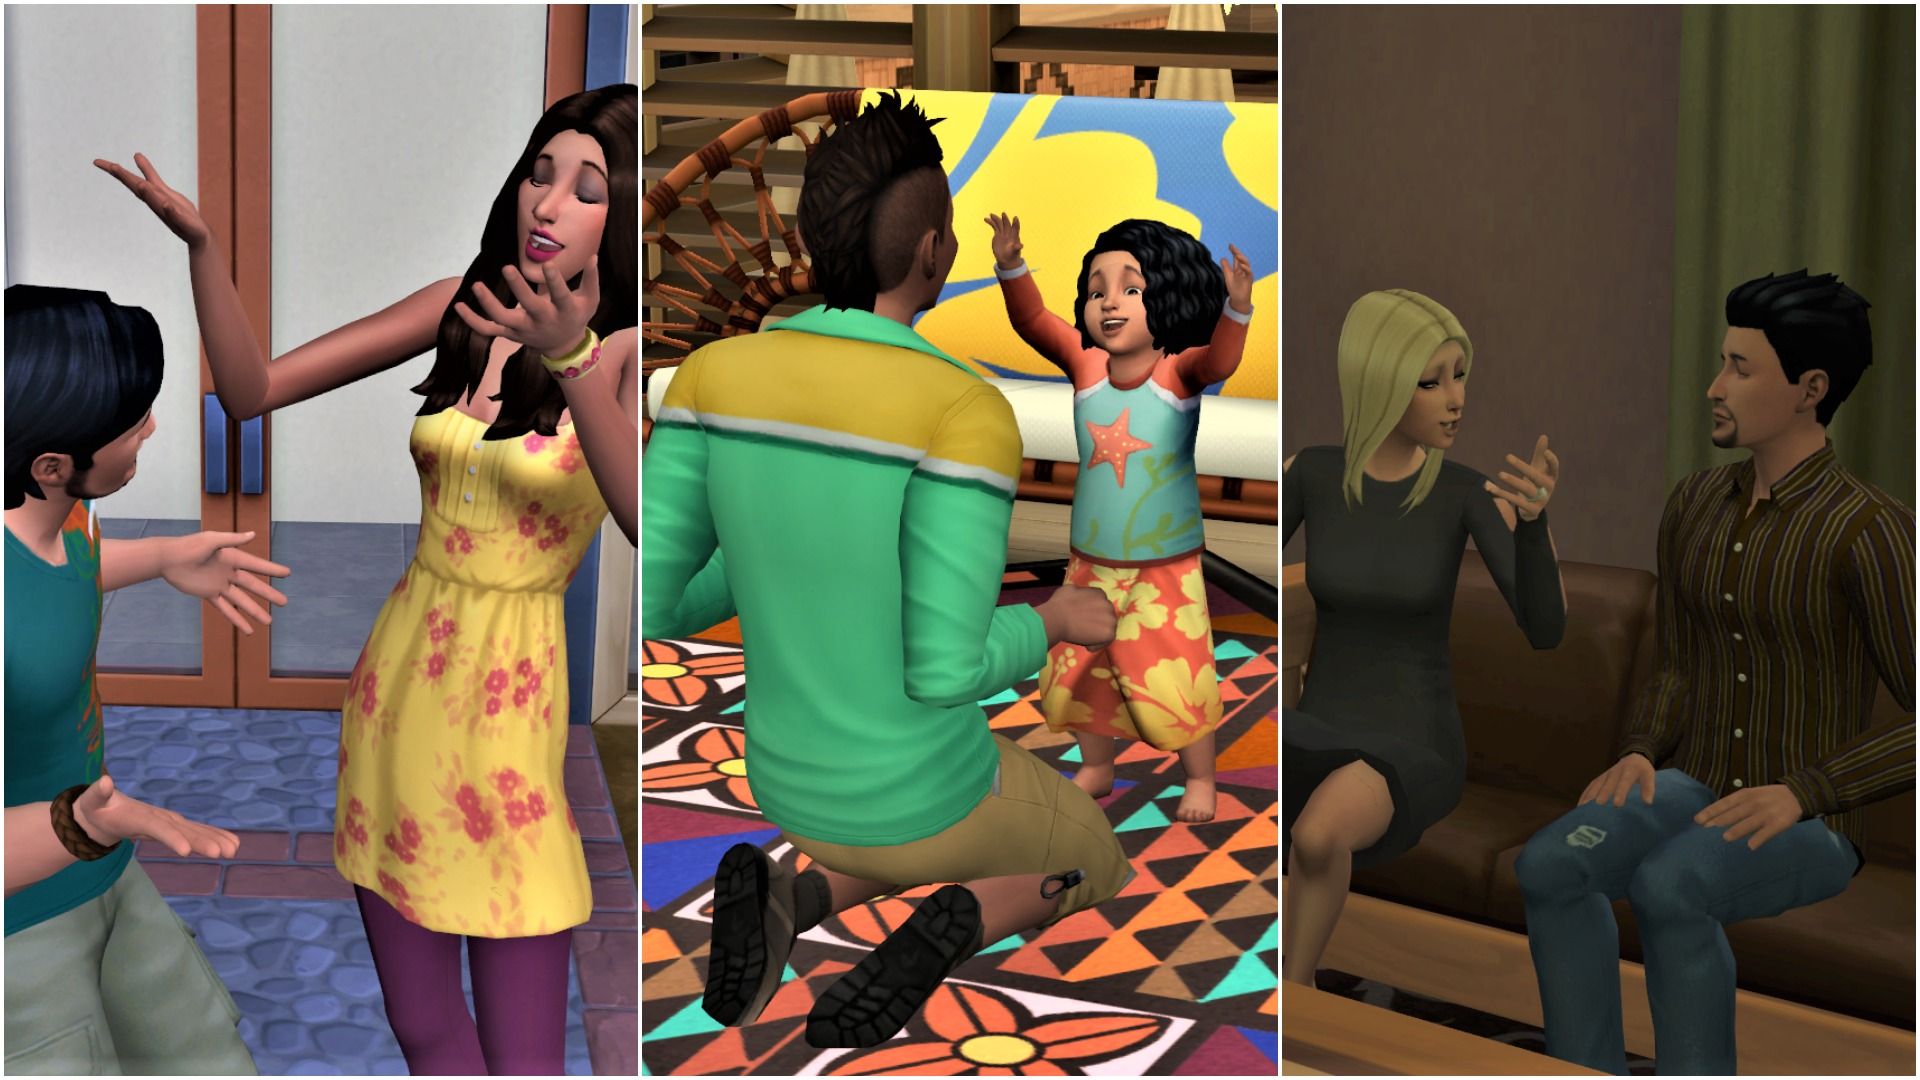 The Sims 4 Mods List for Improved Game Play